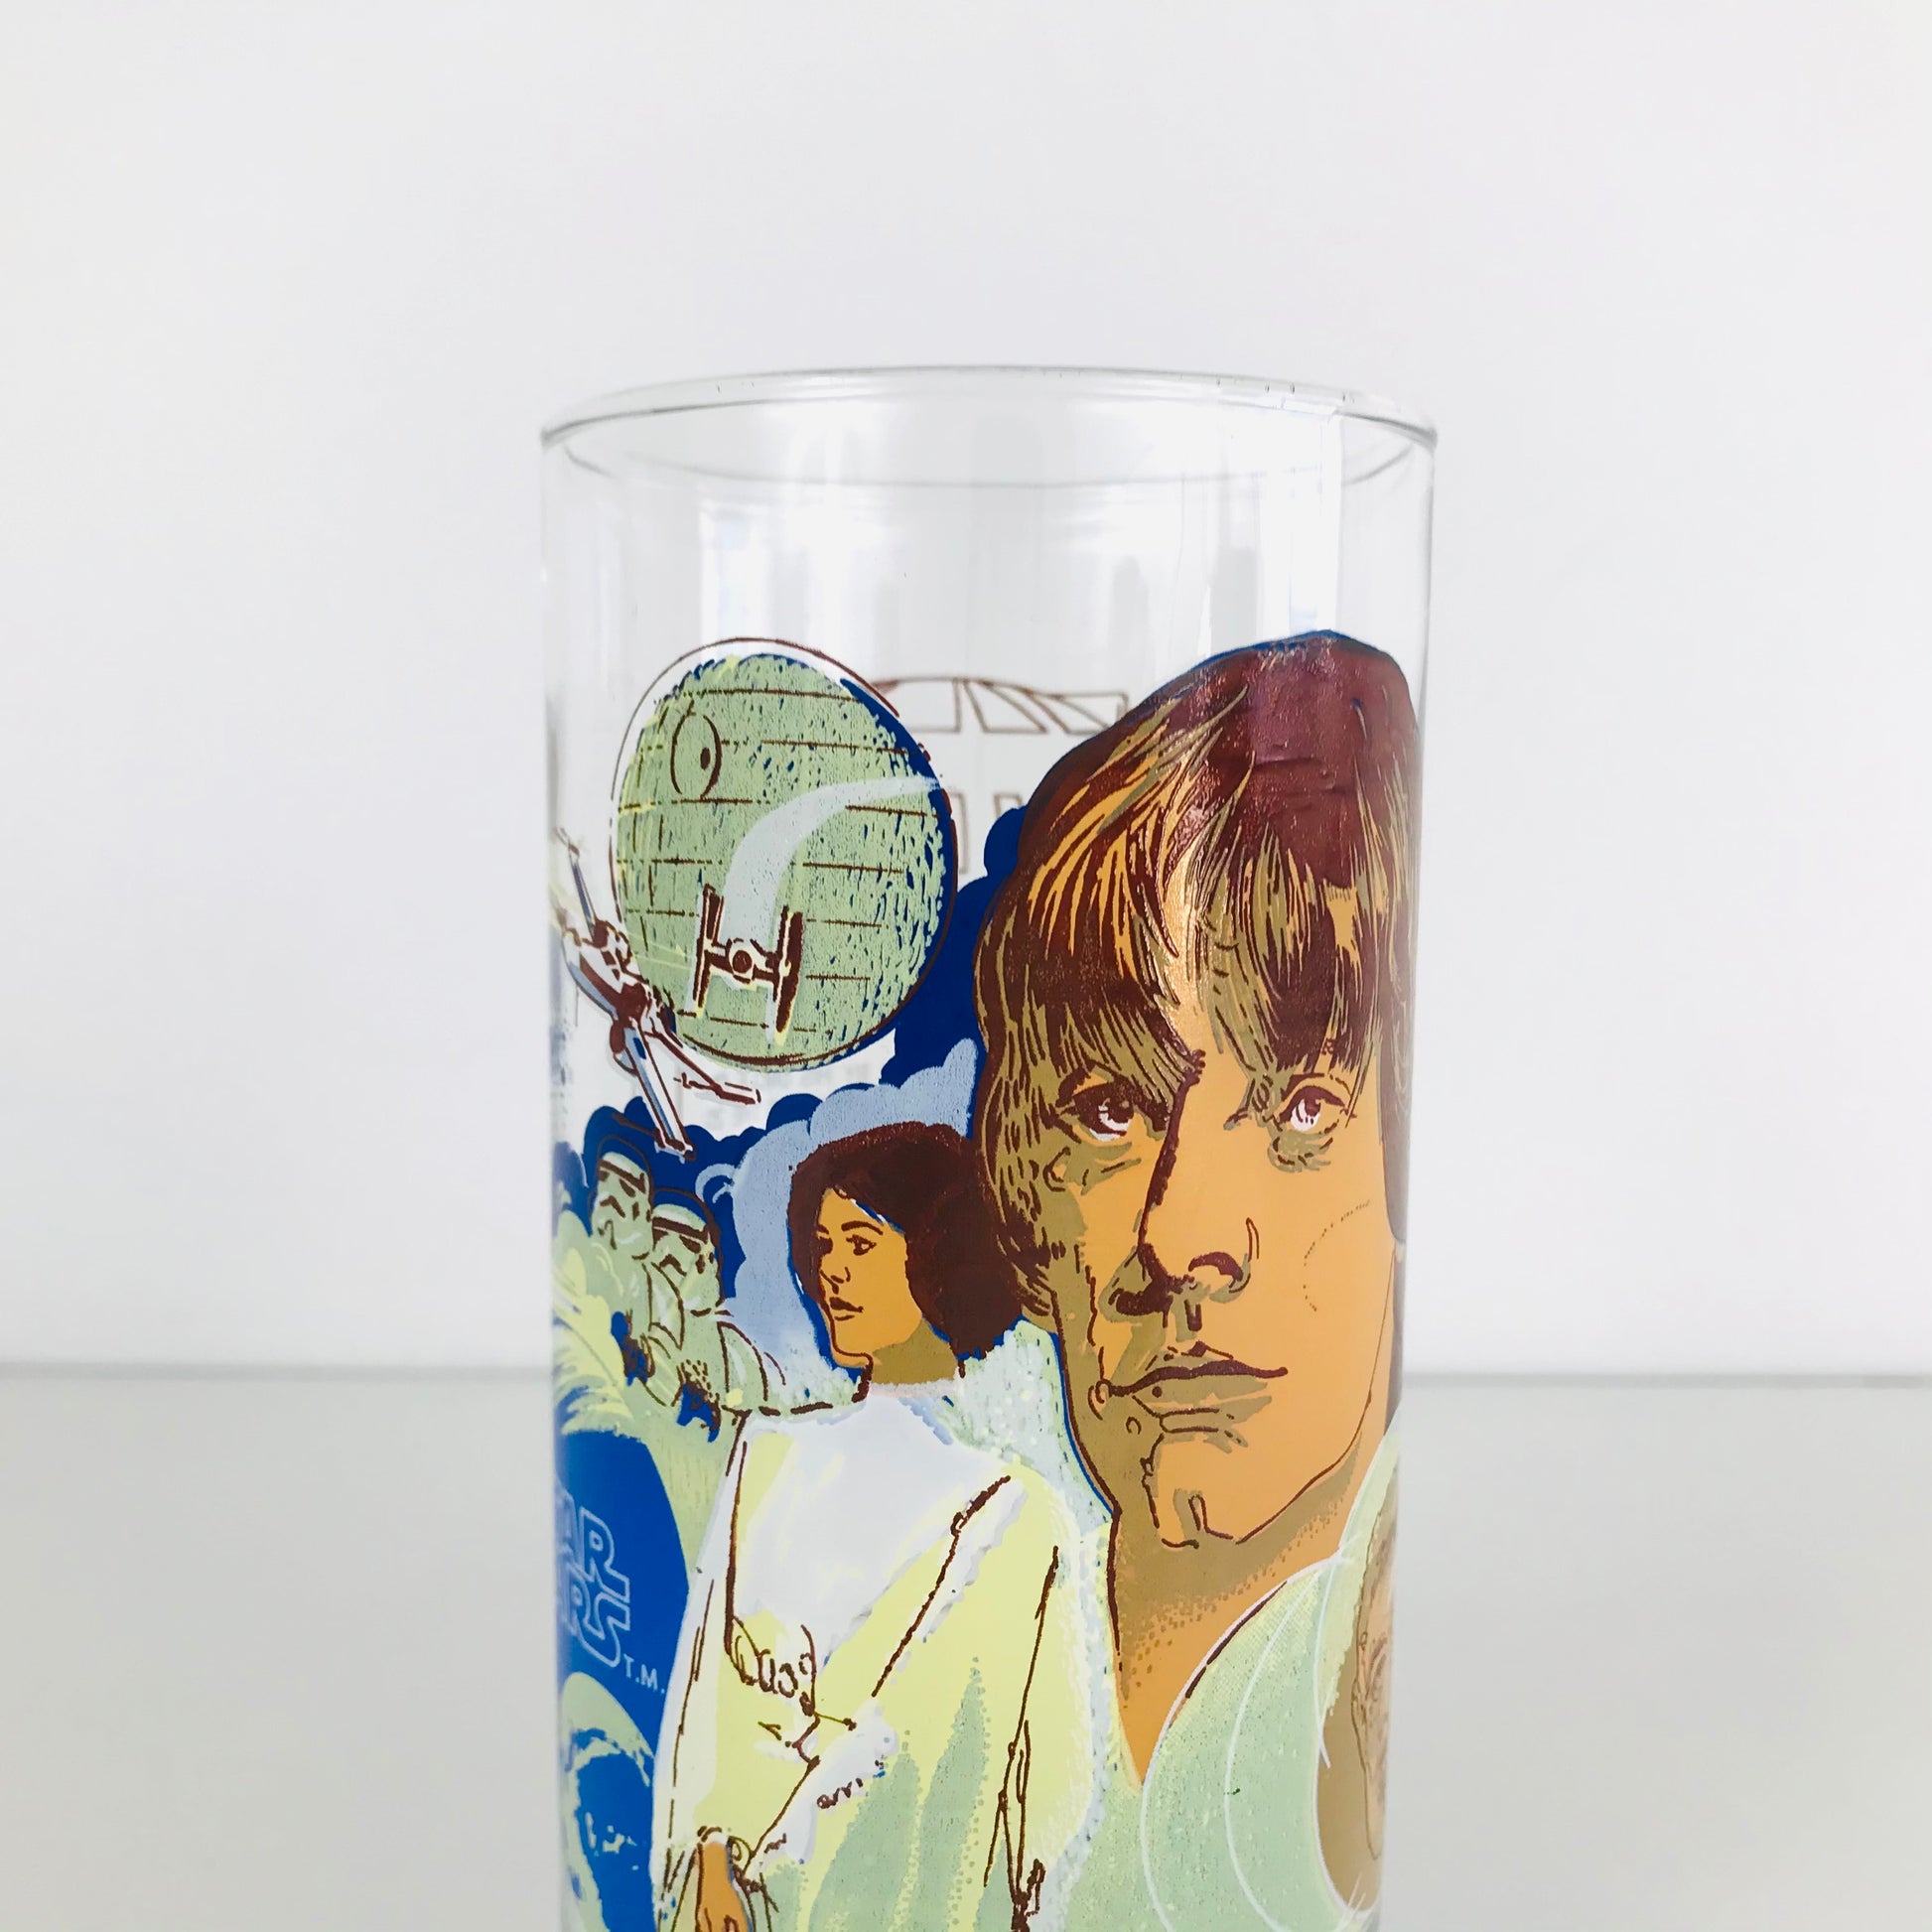 Top of a Star Wars glass tumbler showing detailed artwork of an X-Wing Fighter battling a TIE Fighter in front of the Death Star.